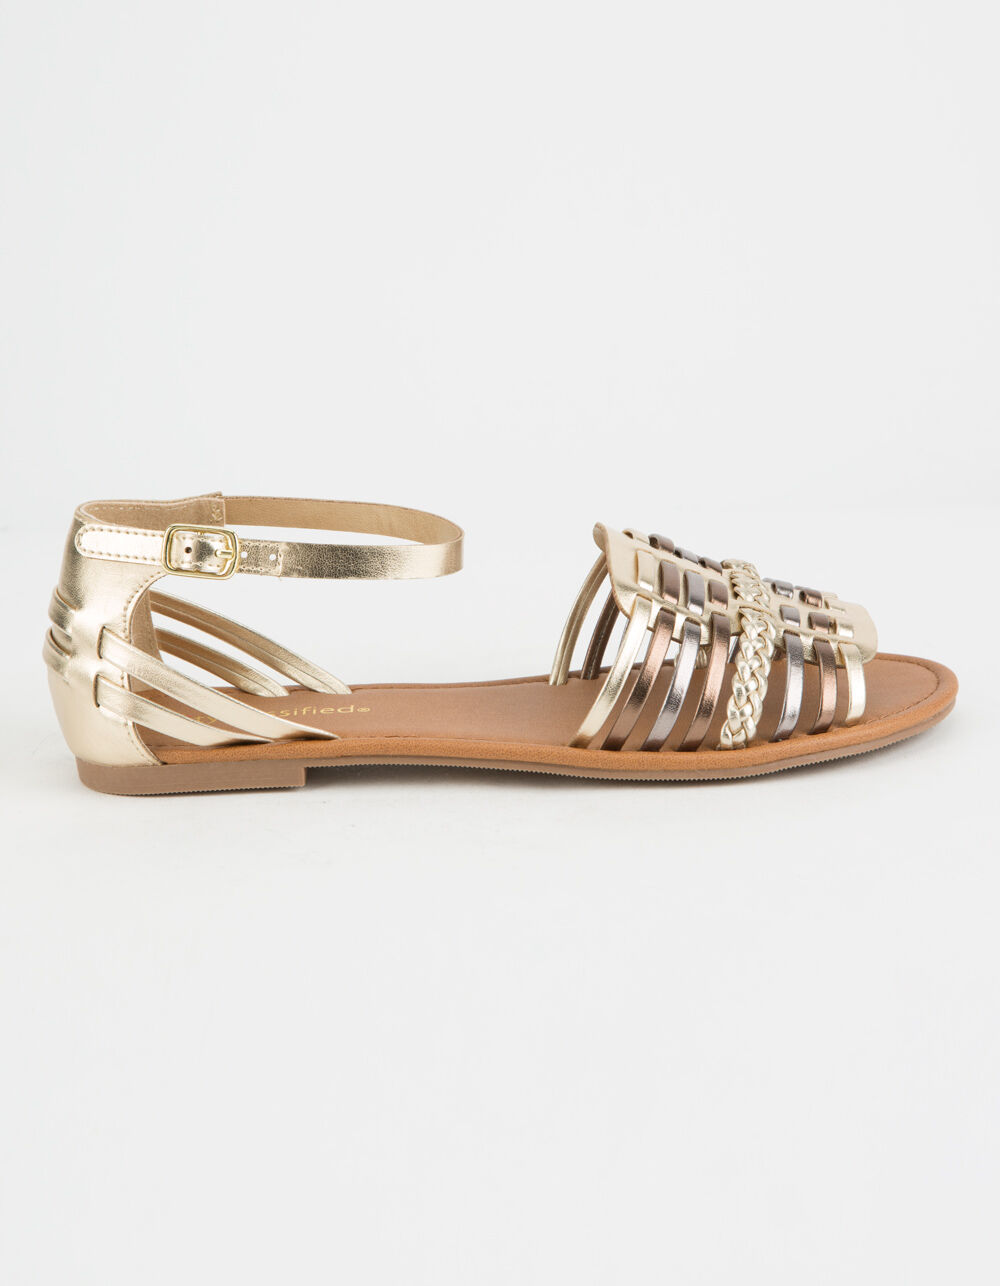 CITY CLASSIFIED Woven Basket Weave Gold Womens Sandals - GOLD | Tillys